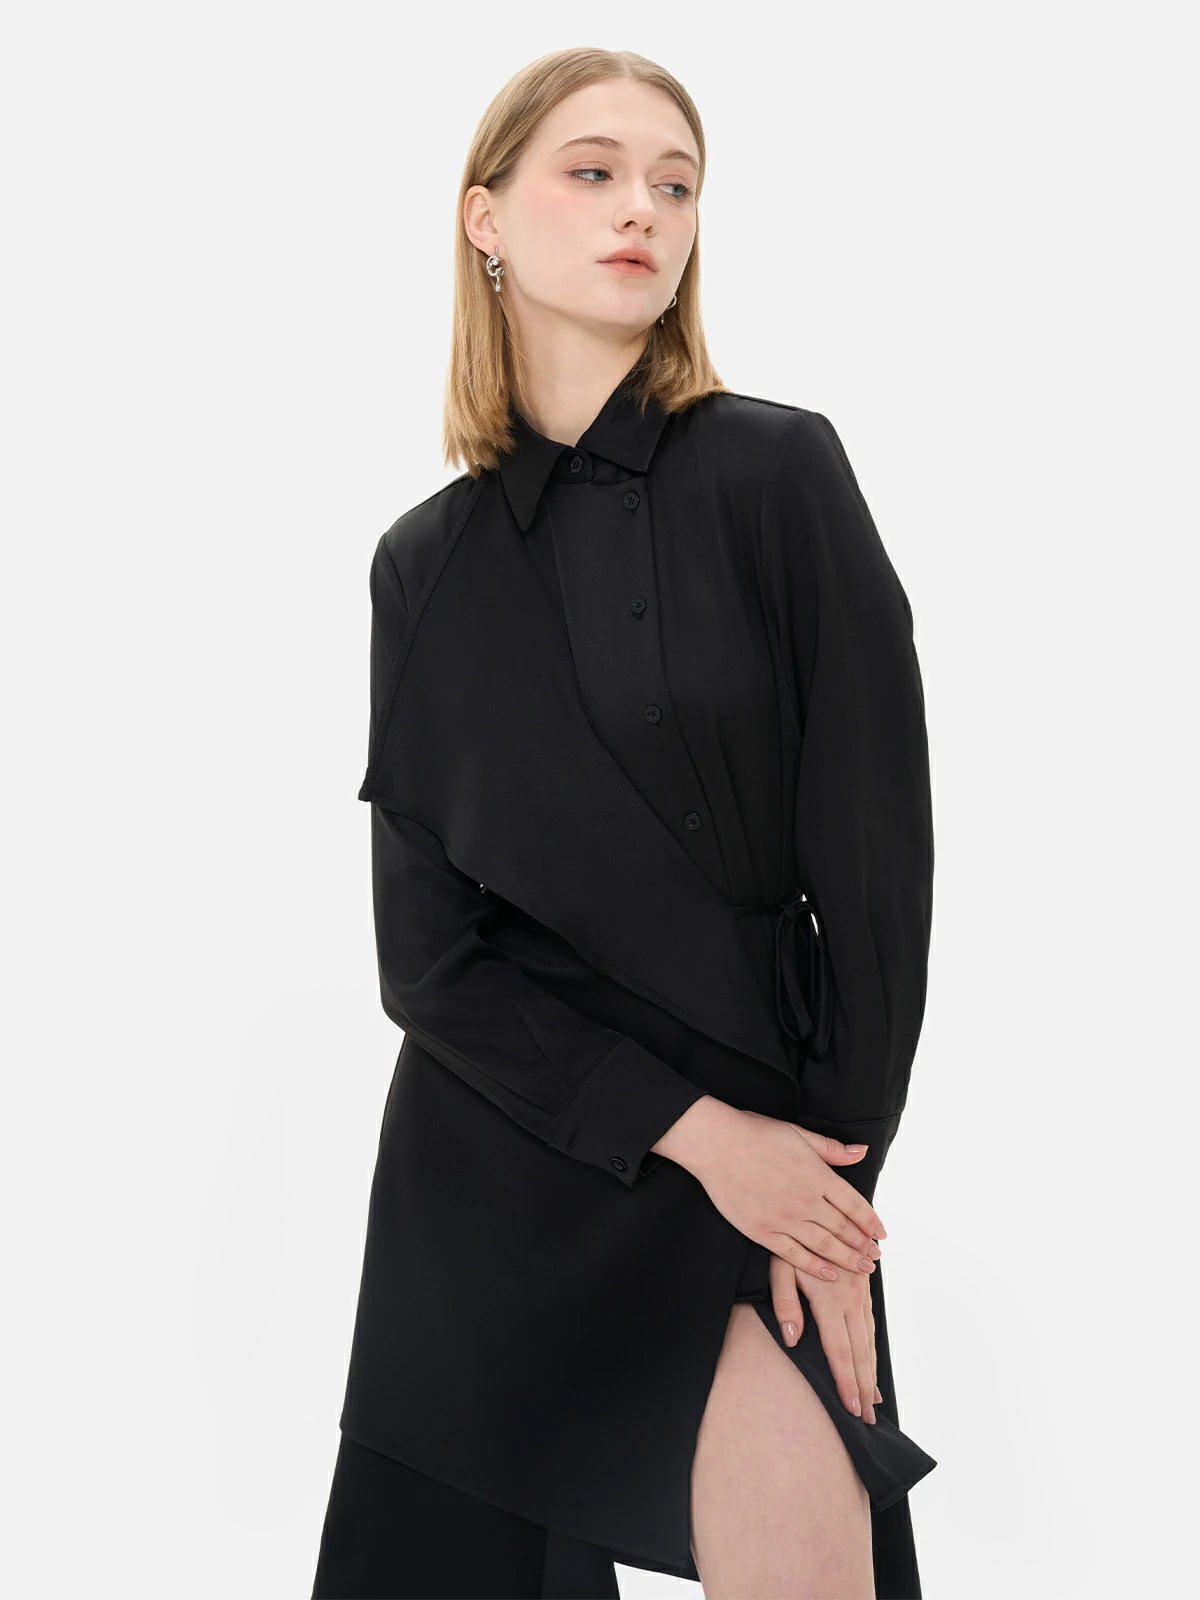 Infuse your look with sophistication in this black shirt dress featuring a waist-tie accent, irregular hem, and front paneling.